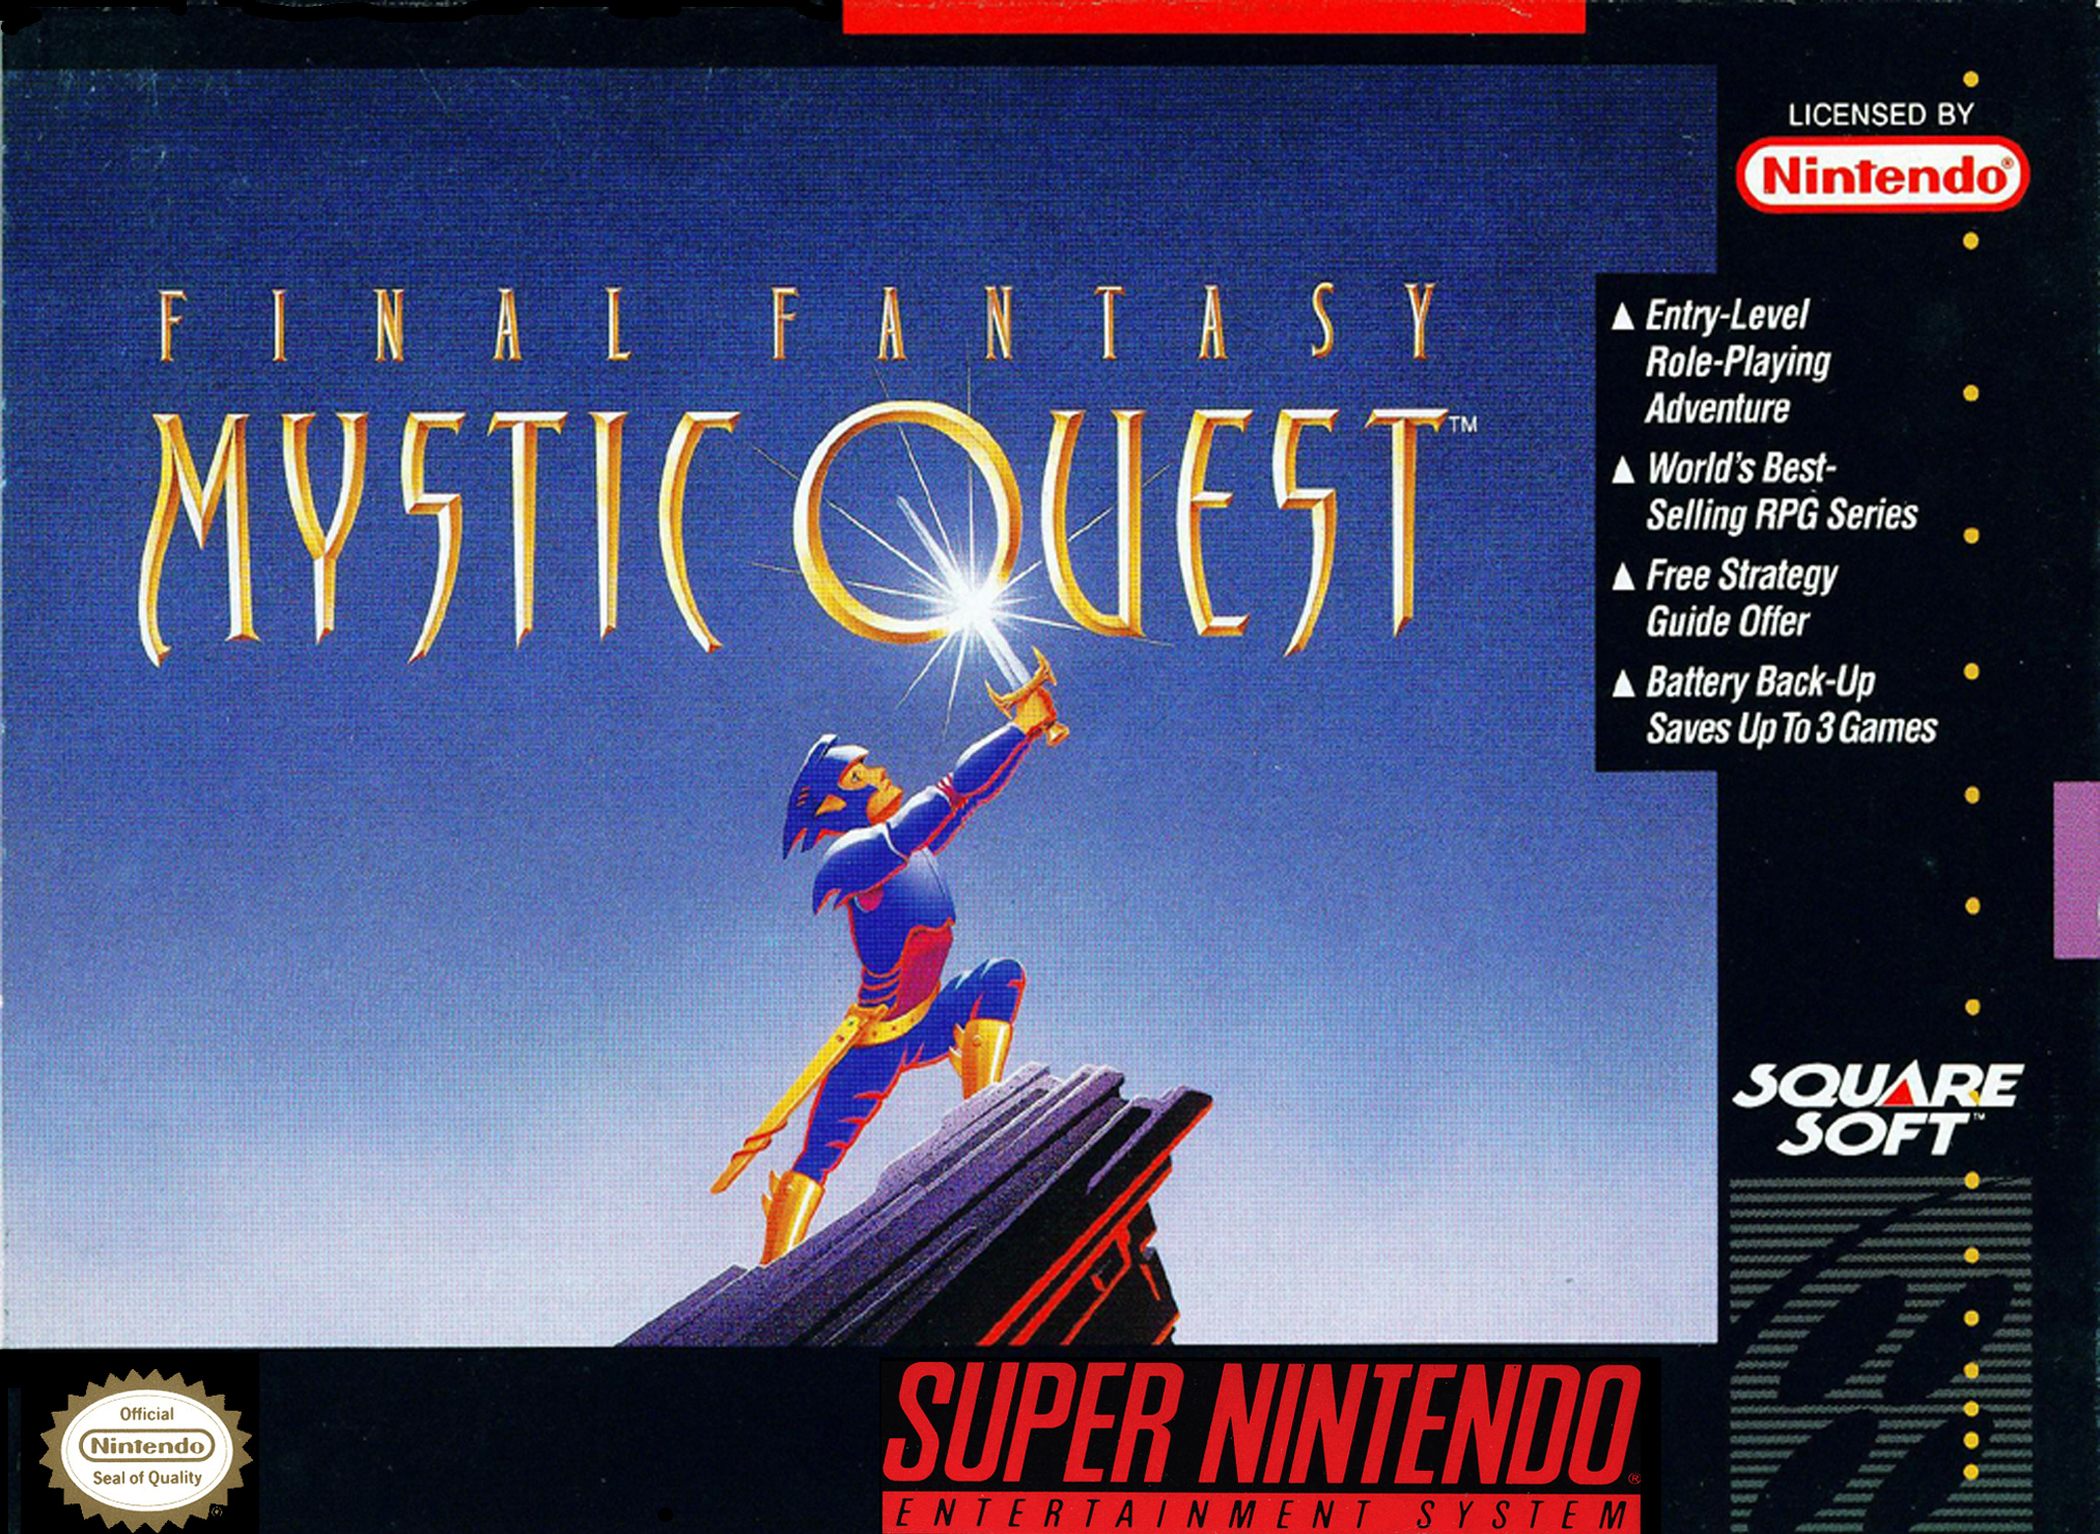 user-review-final-fantasy-mystic-quest-retro-gbatemp-the-independent-video-game-community